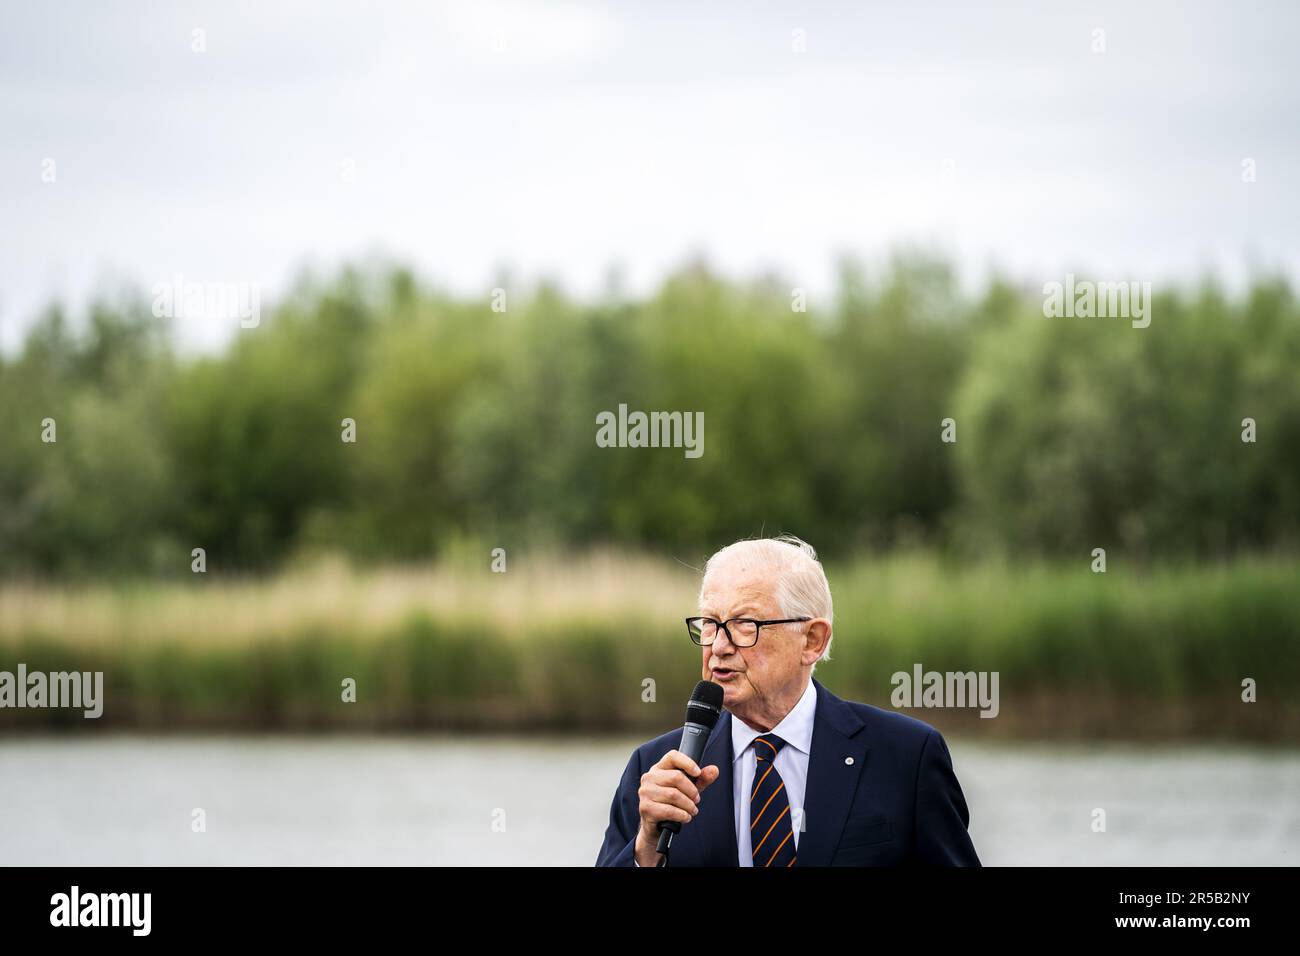 WORKENDAM - Prof. dr. mr. Pieter van Vollenhoven during the release of sturgeons in the water of De Biesbosch National Park. The release and tracking of the tagged animals is an important step in exploring the possibility of reintroduction of this fish species. ANP JEROEN JUMELET netherlands out - belgium out Stock Photo